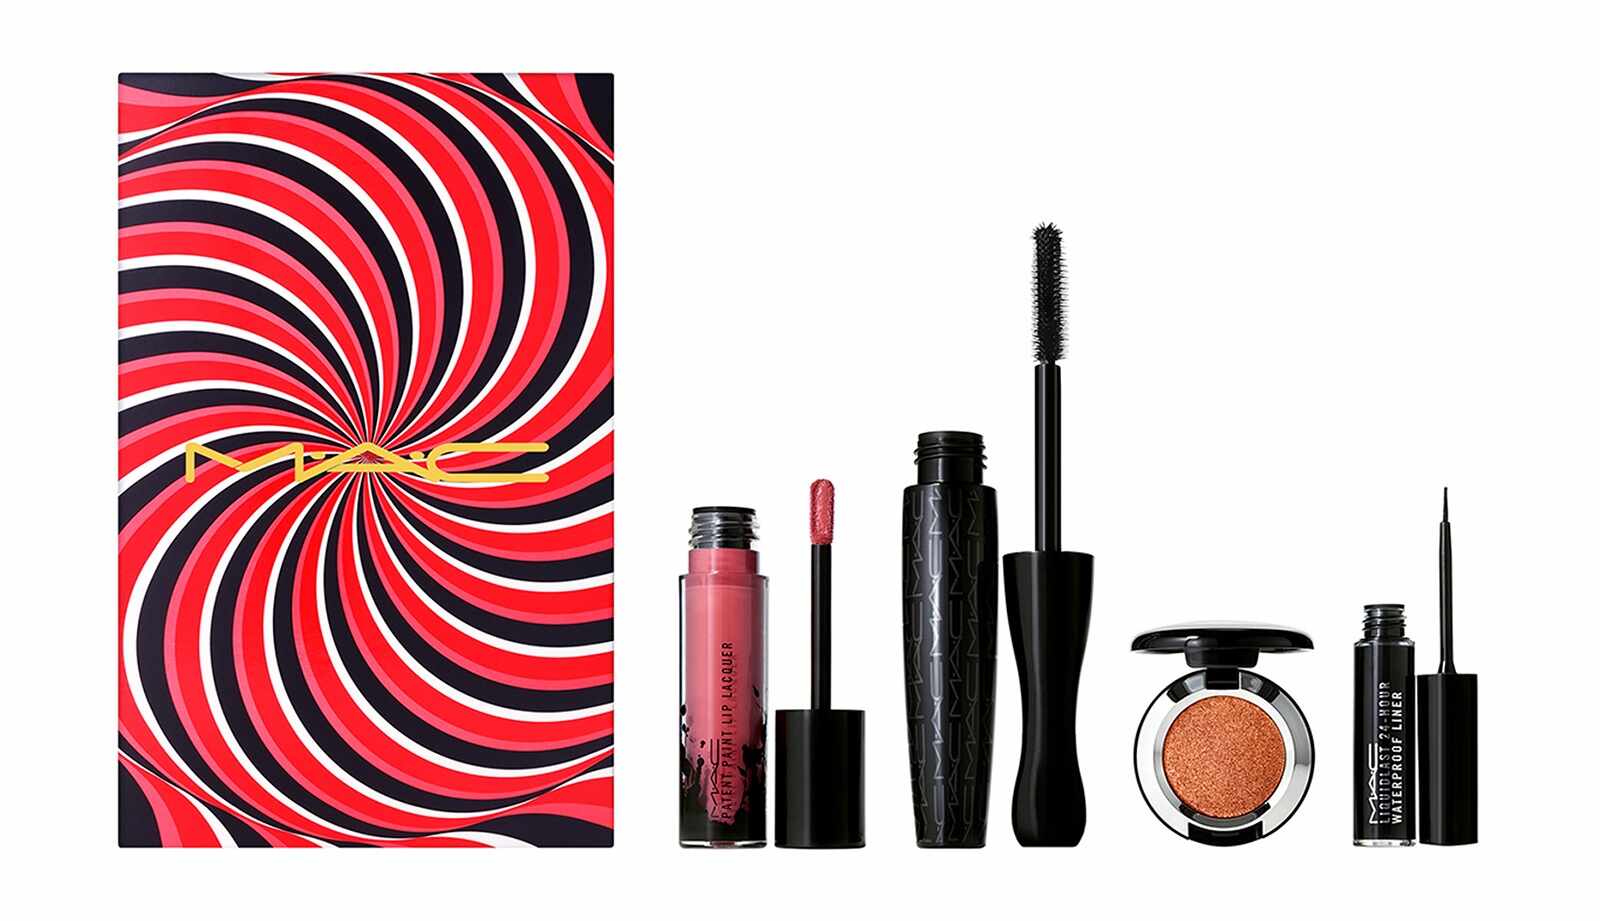 Mac Ace Your Face Look In A Box Neutral Eyes And Lips Set: Patent Paint Lip Lacquer + Dazzleshadow Extreme Couture Cooper + Liquidlast 24-Hour Waterproof Linerblack + In Extreme Dimension 3D Black Lash Mascara